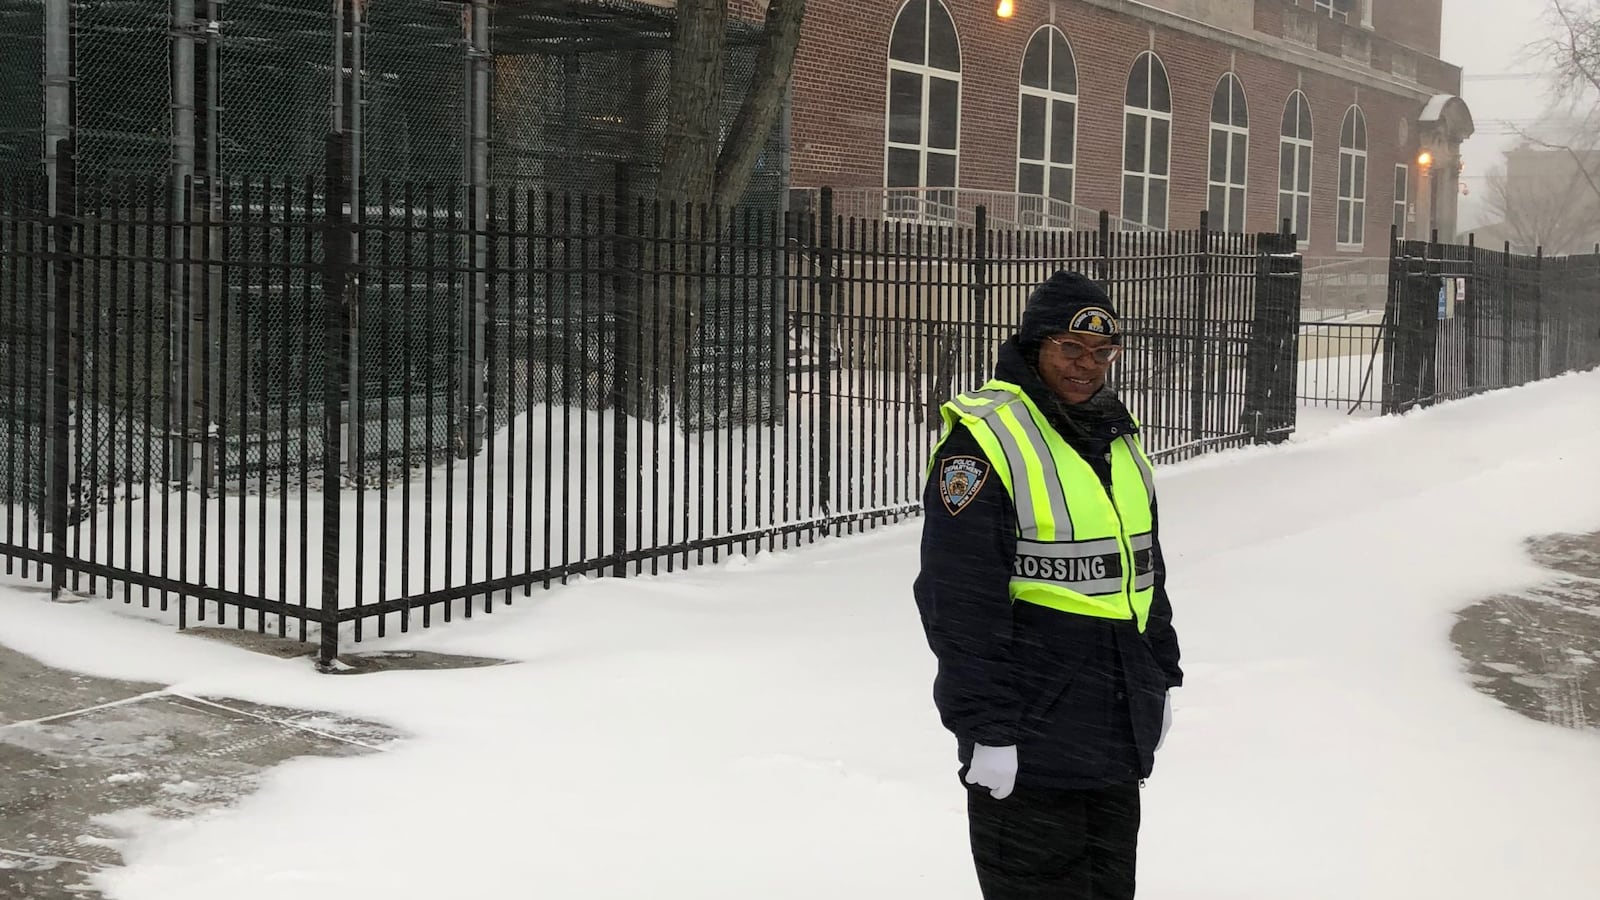 Grace Spinks is a school crossing guard in Brooklyn. She worries she won't get paid during while New York City schools are closed due to the new coronavirus.